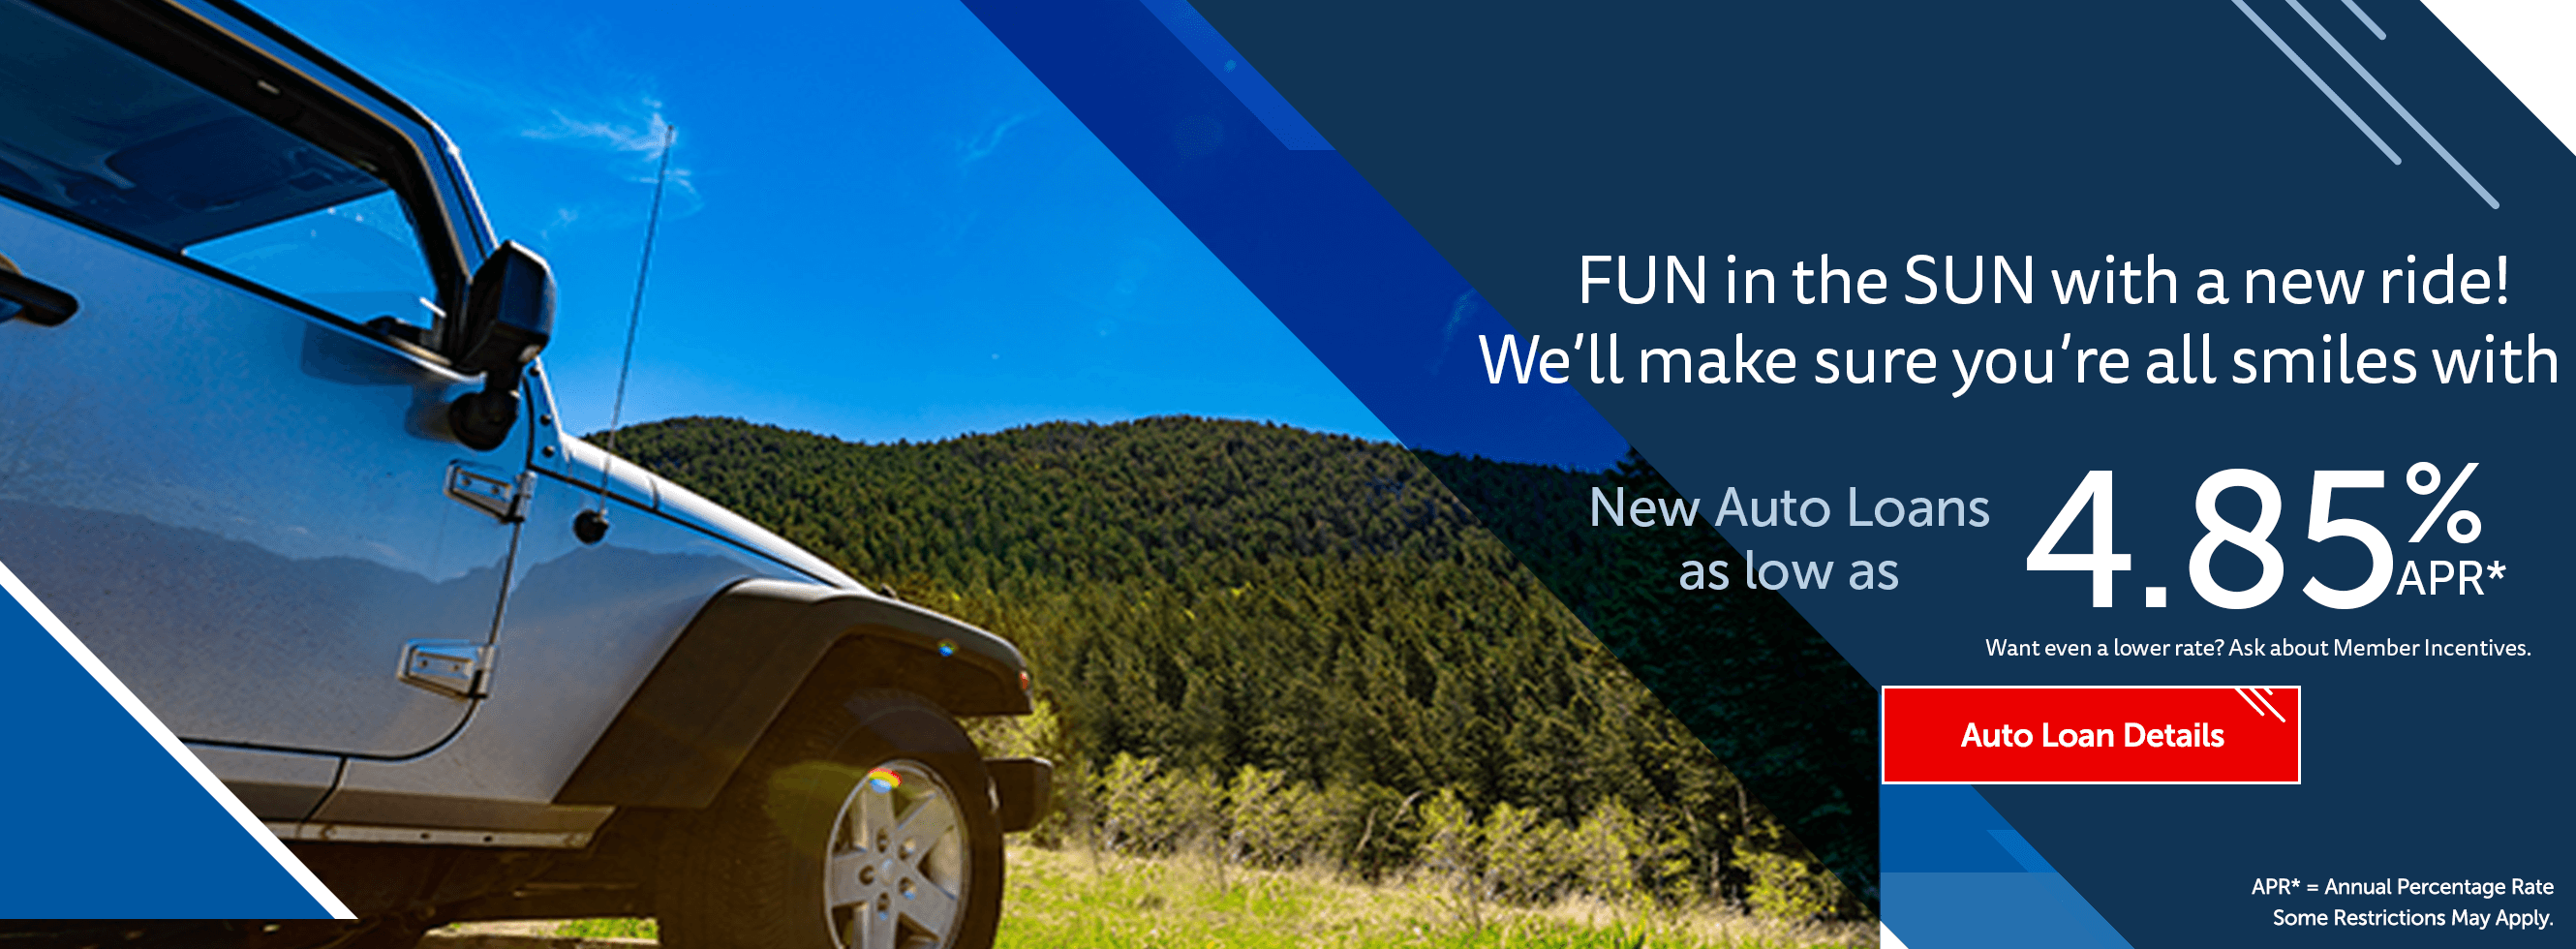 Fun in the Sun with your new ride!